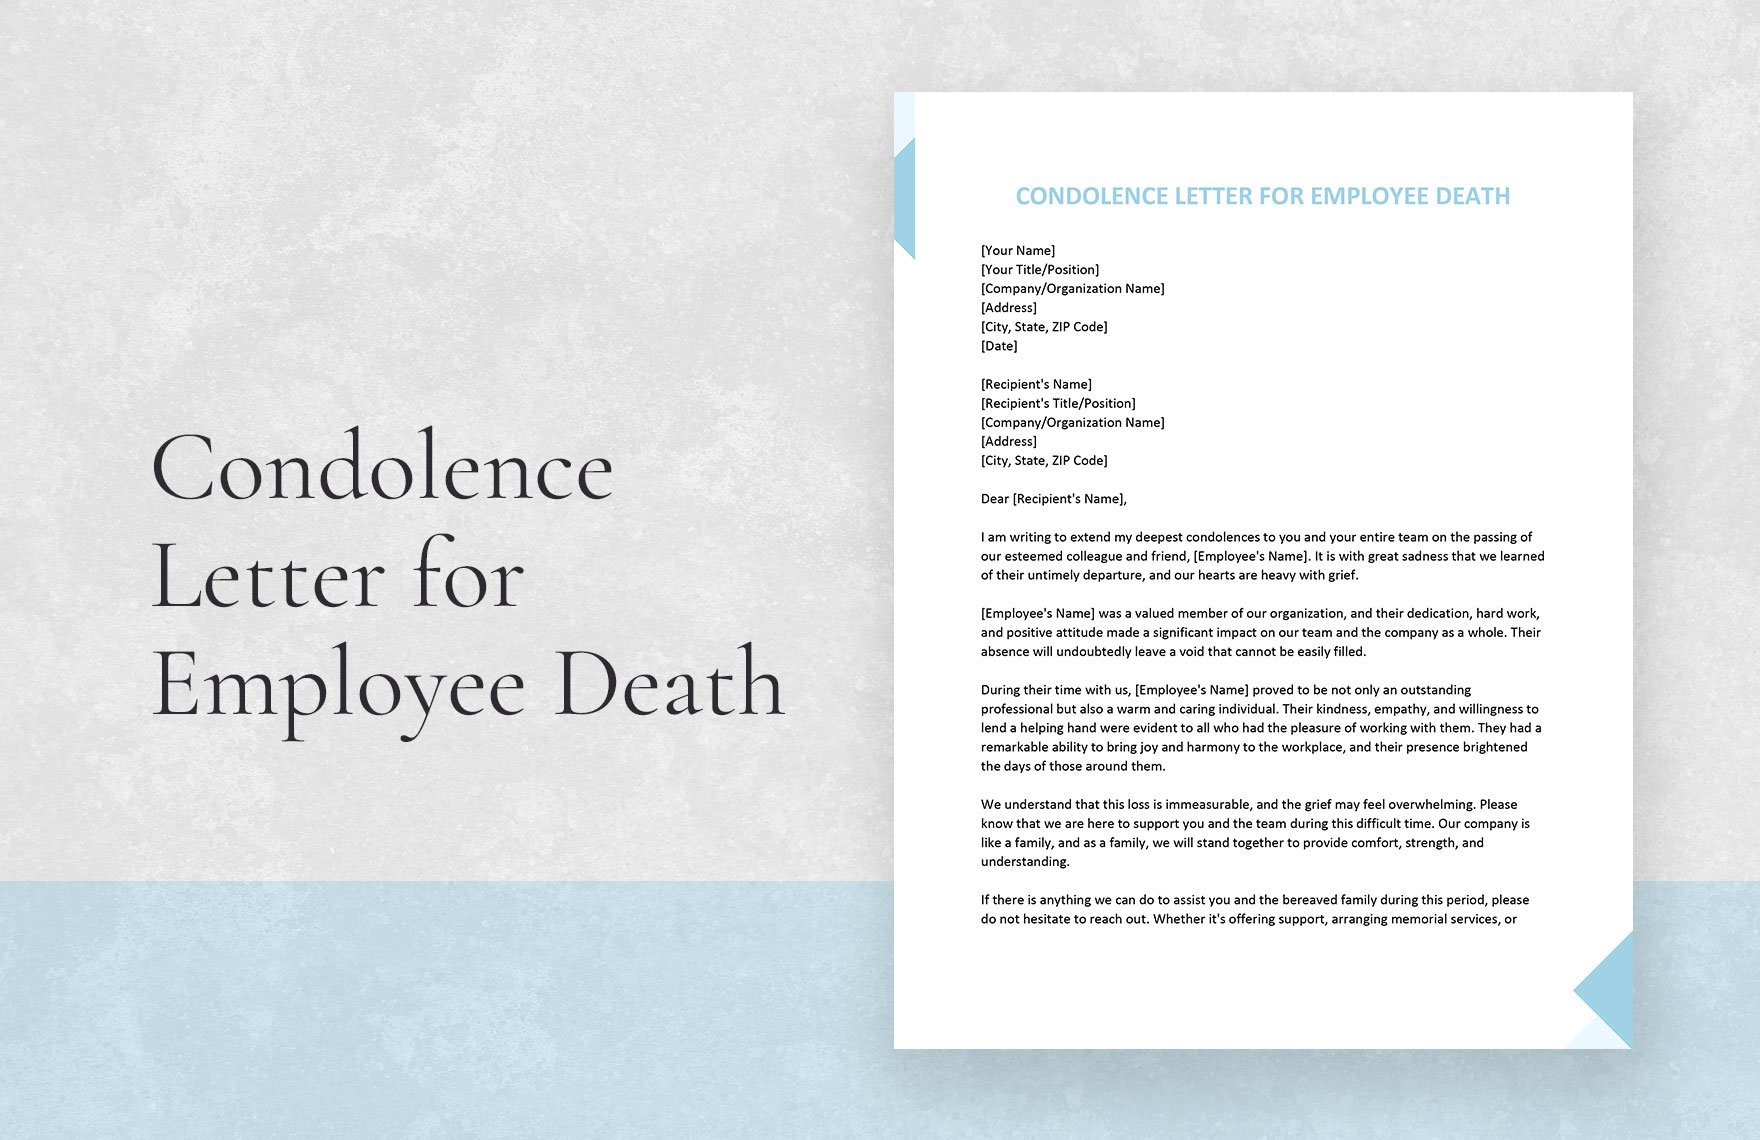 Condolence Letter for Employee Death